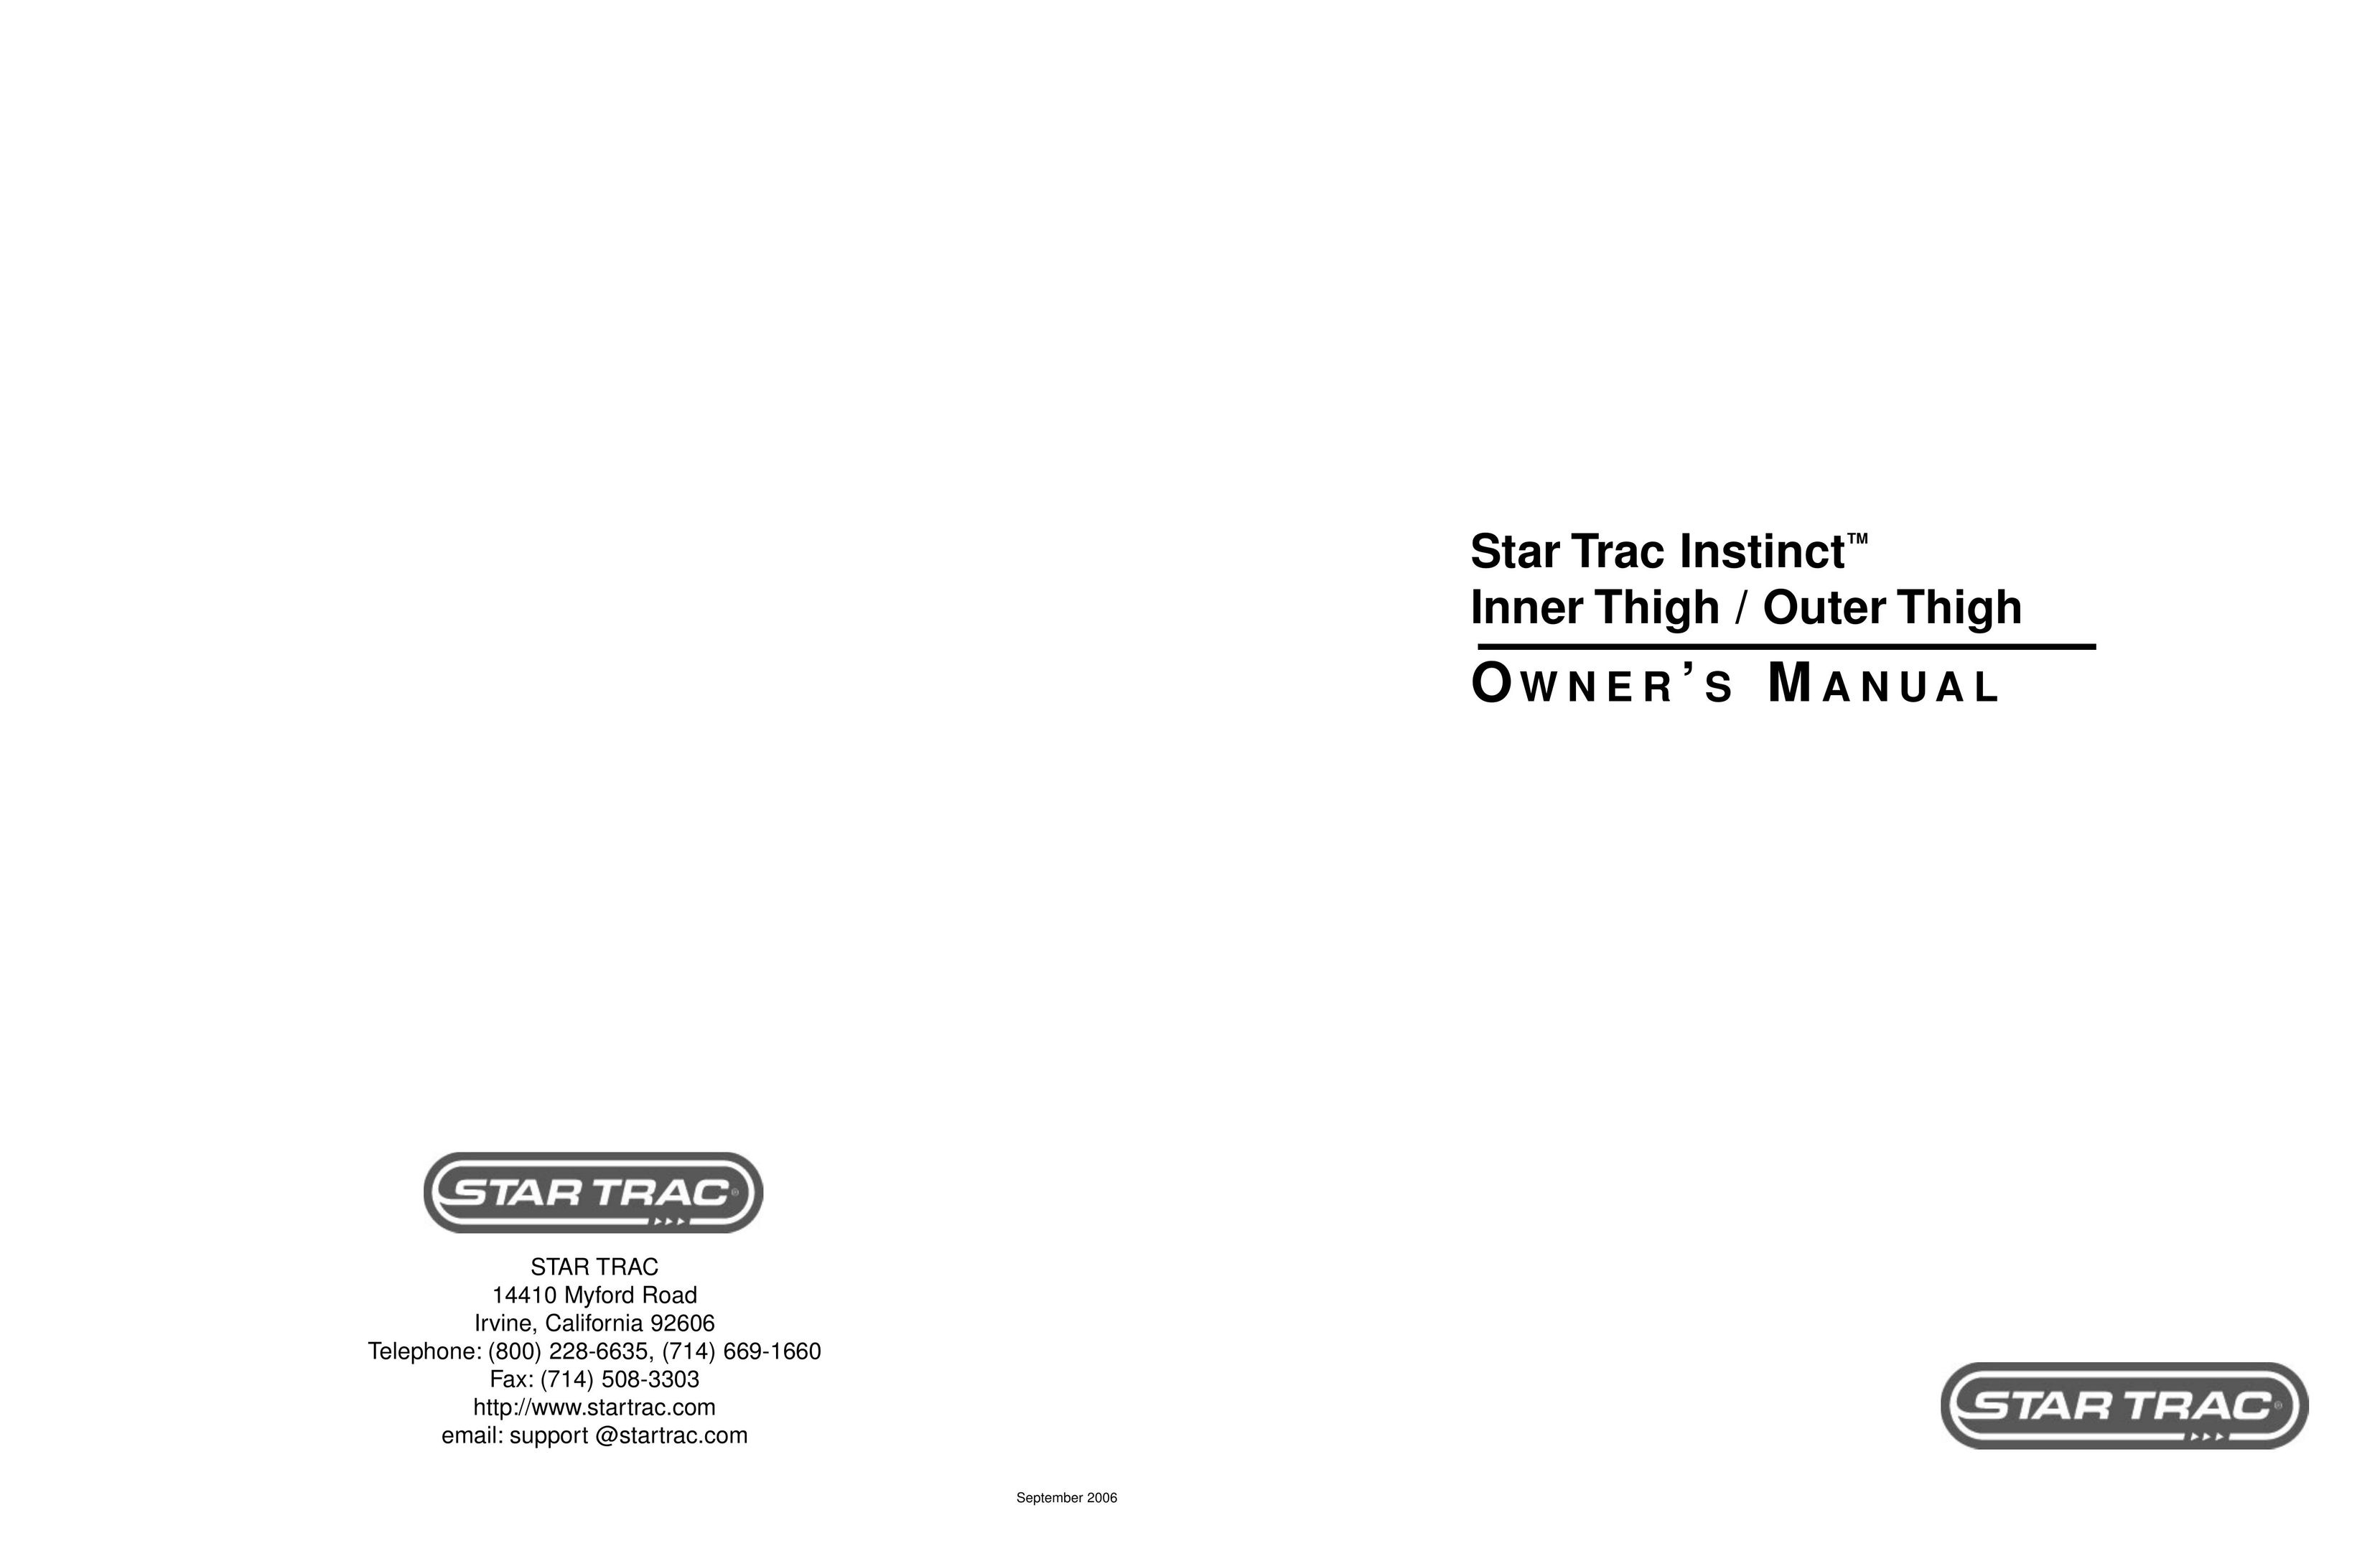 Star Trac Inner/Outer Thigh Machine Home Gym User Manual